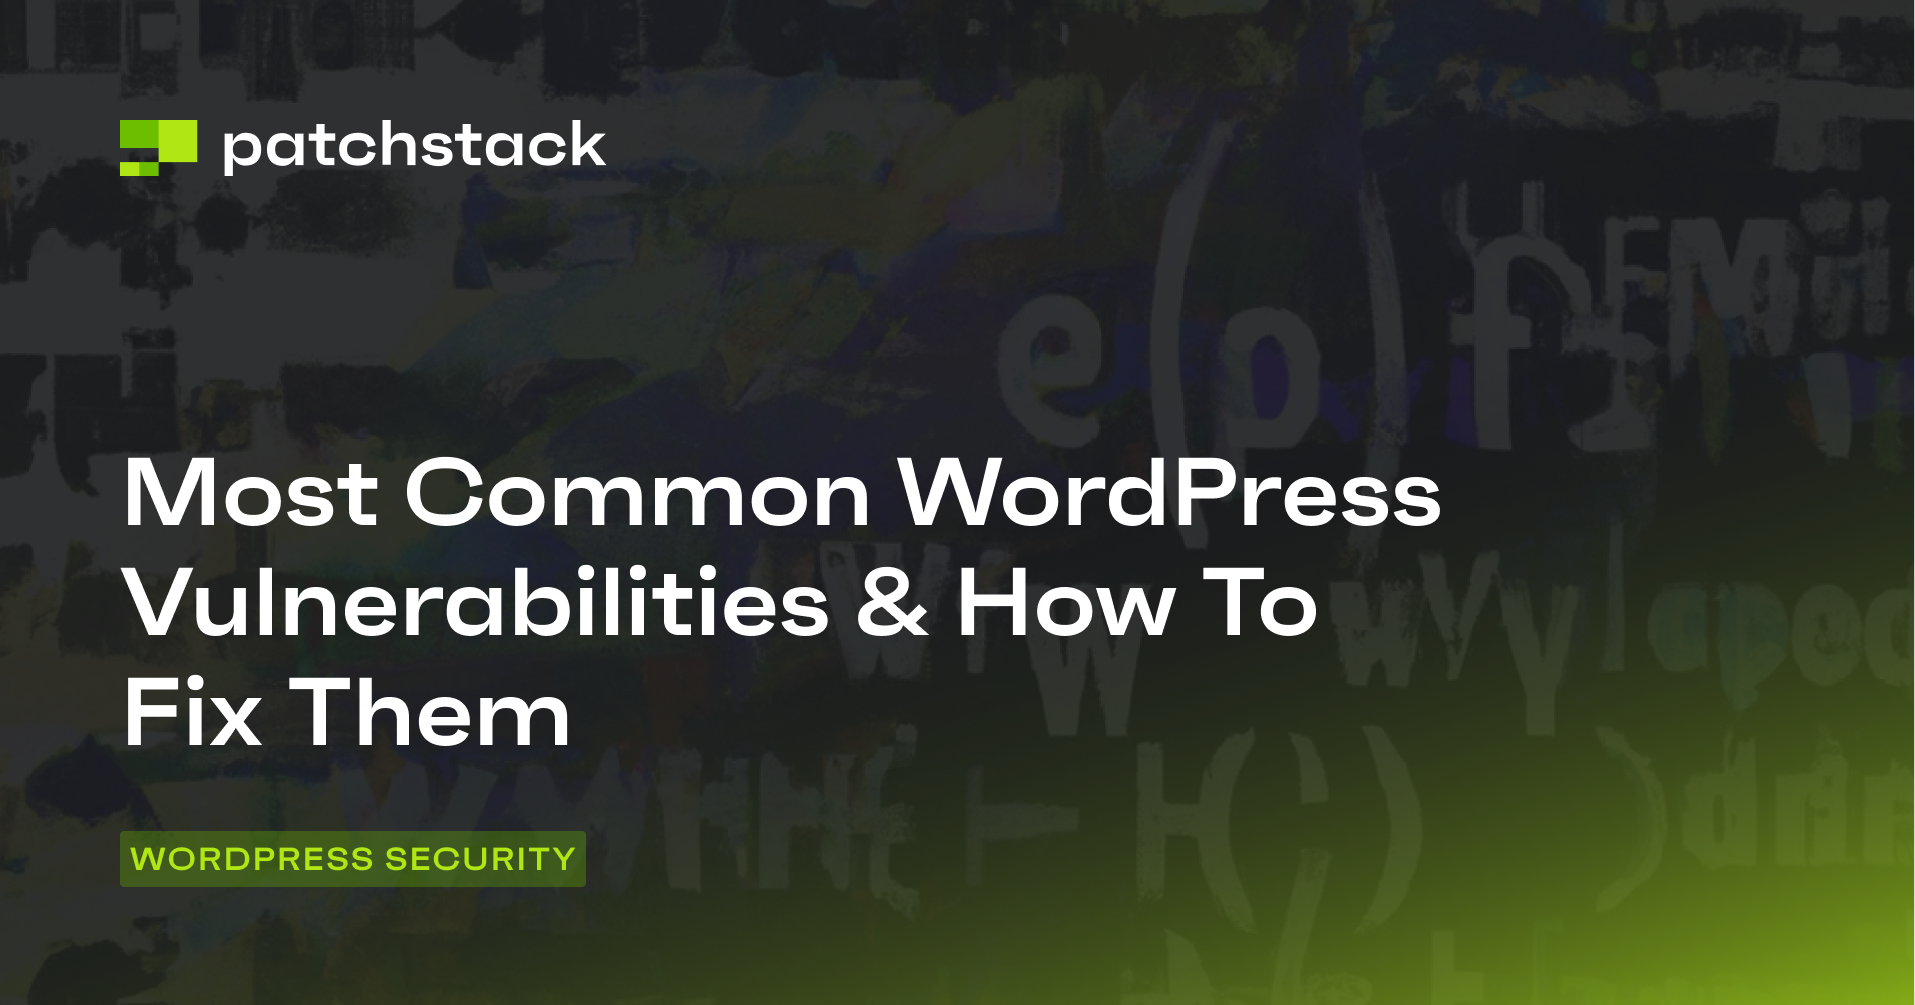 Most common WordPress vulnerabilities and how to fix them